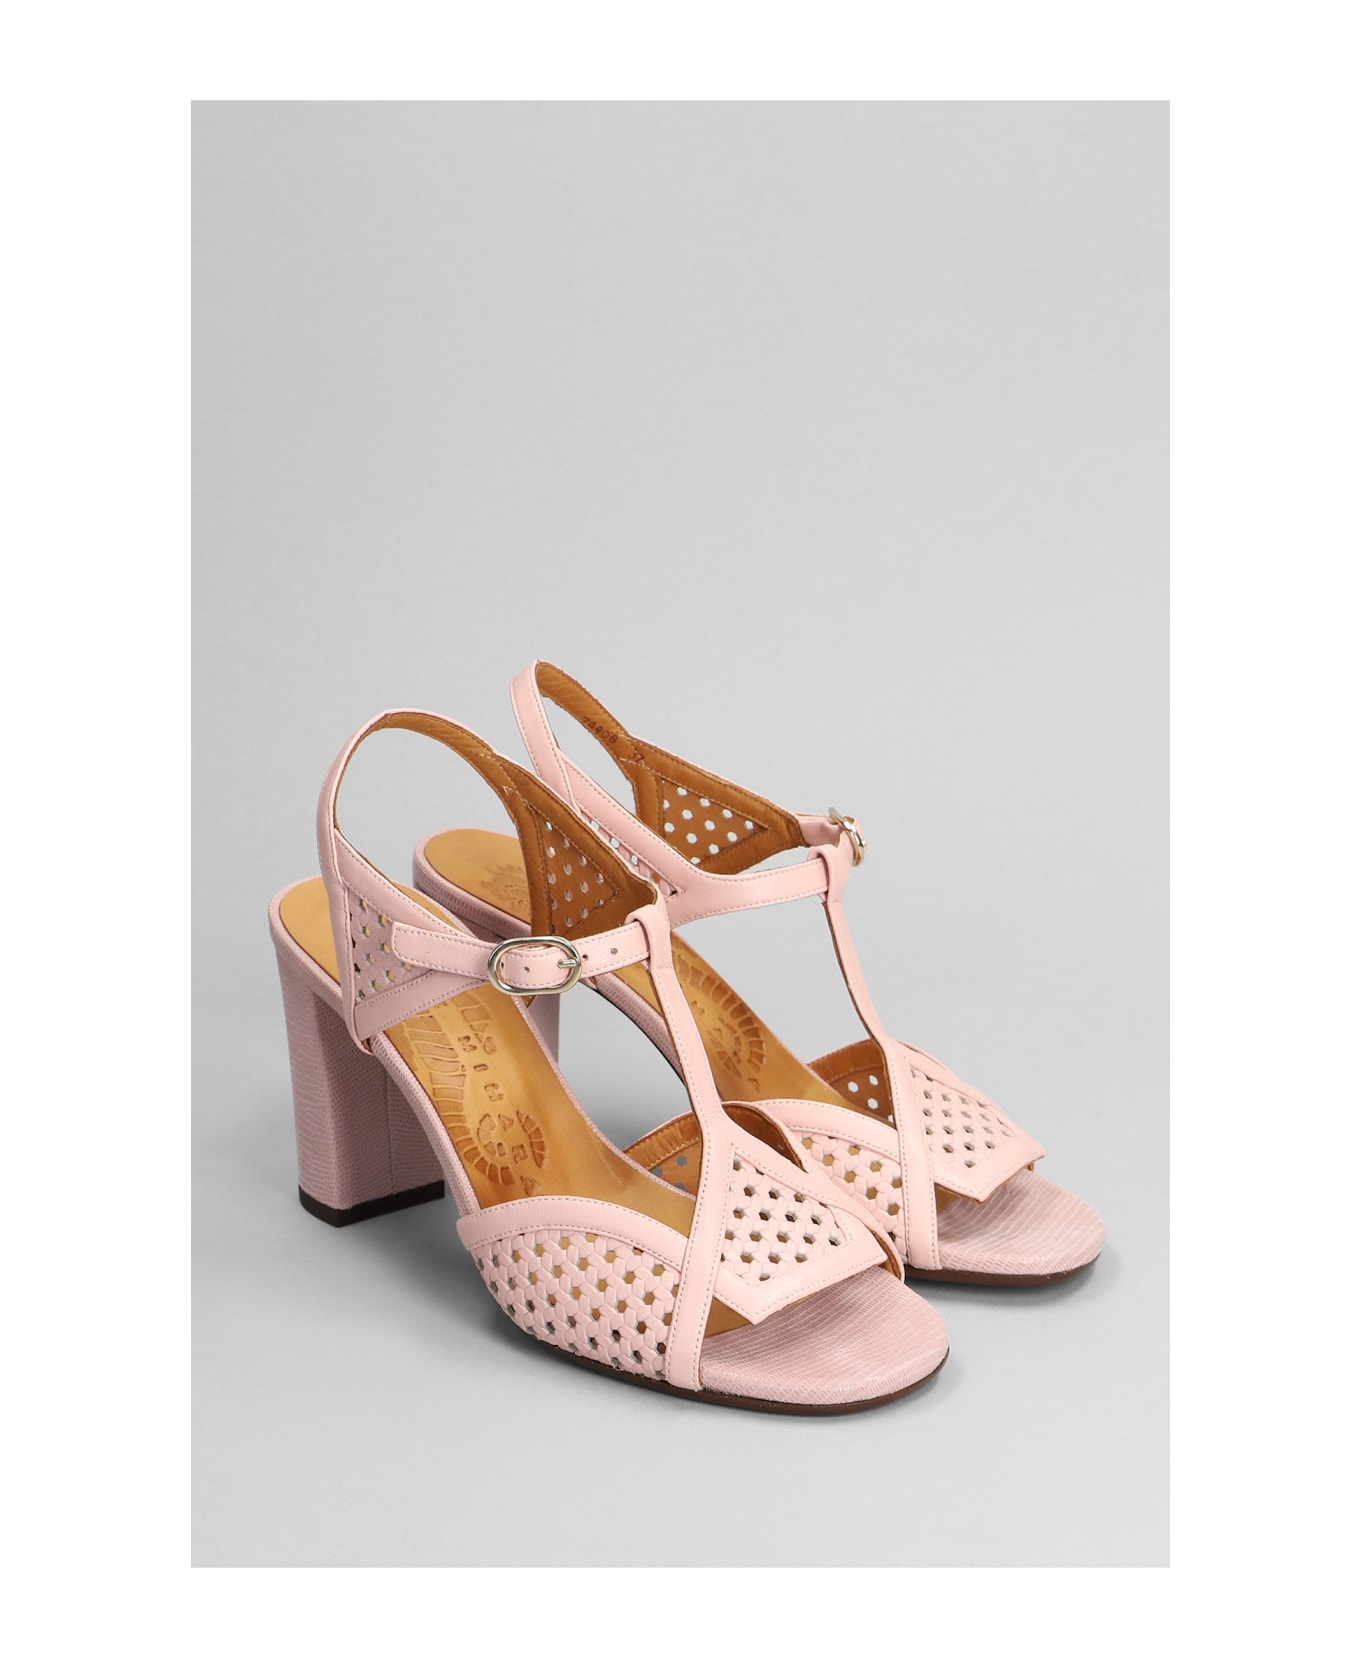 Chie Mihara Bessy Sandals In Rose-pink Leather - rose-pink